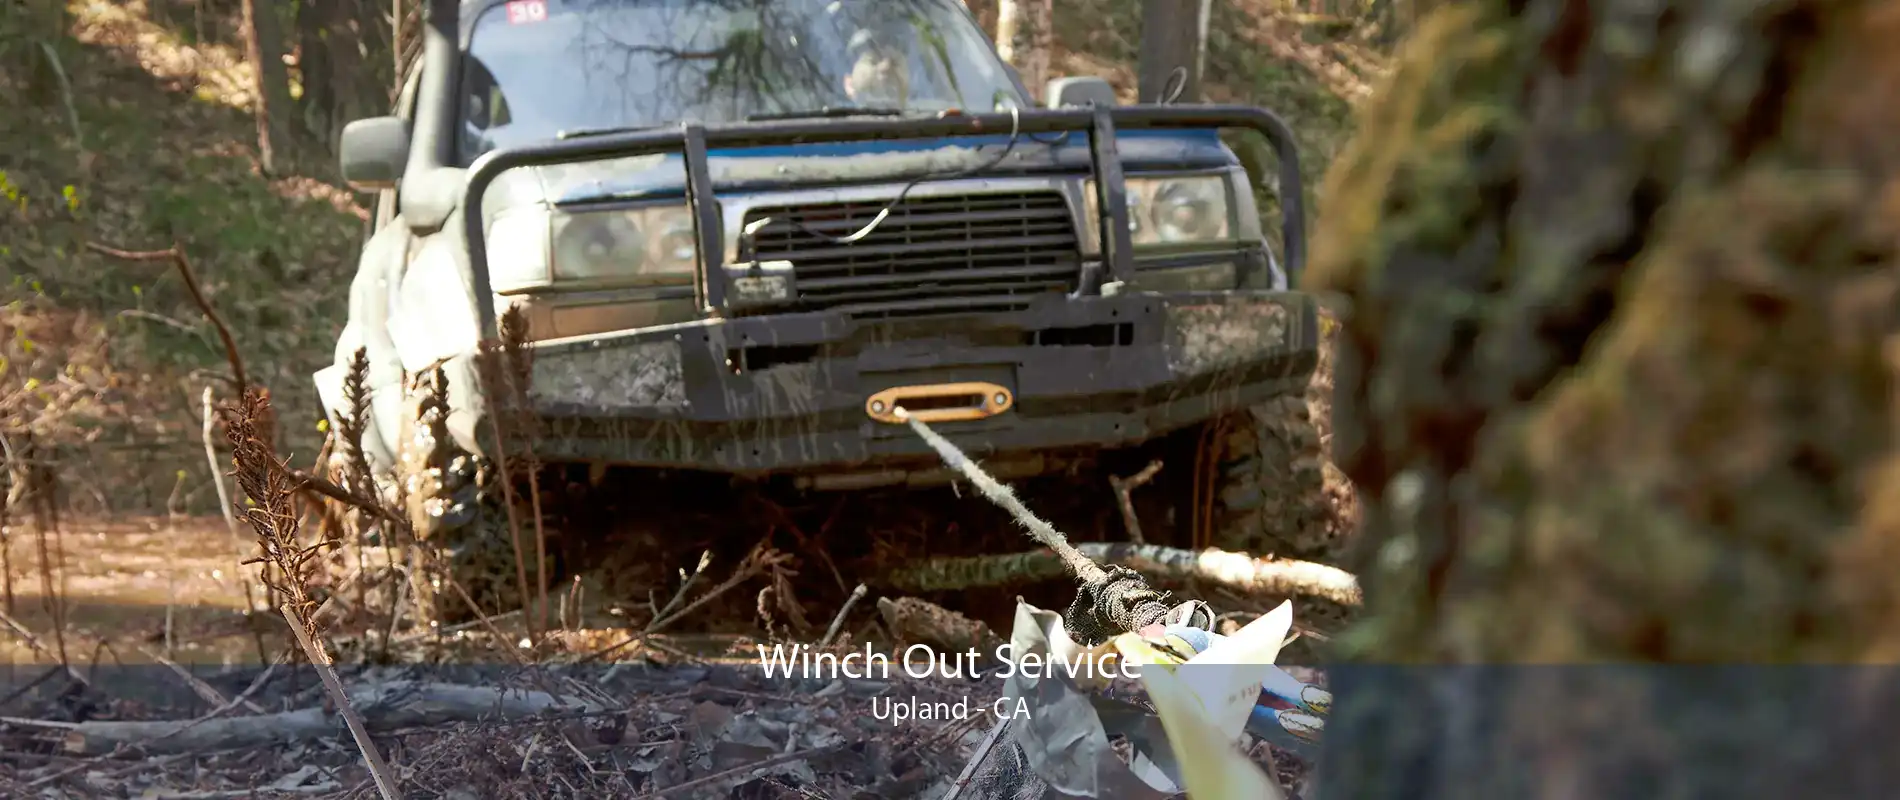 Winch Out Service Upland - CA